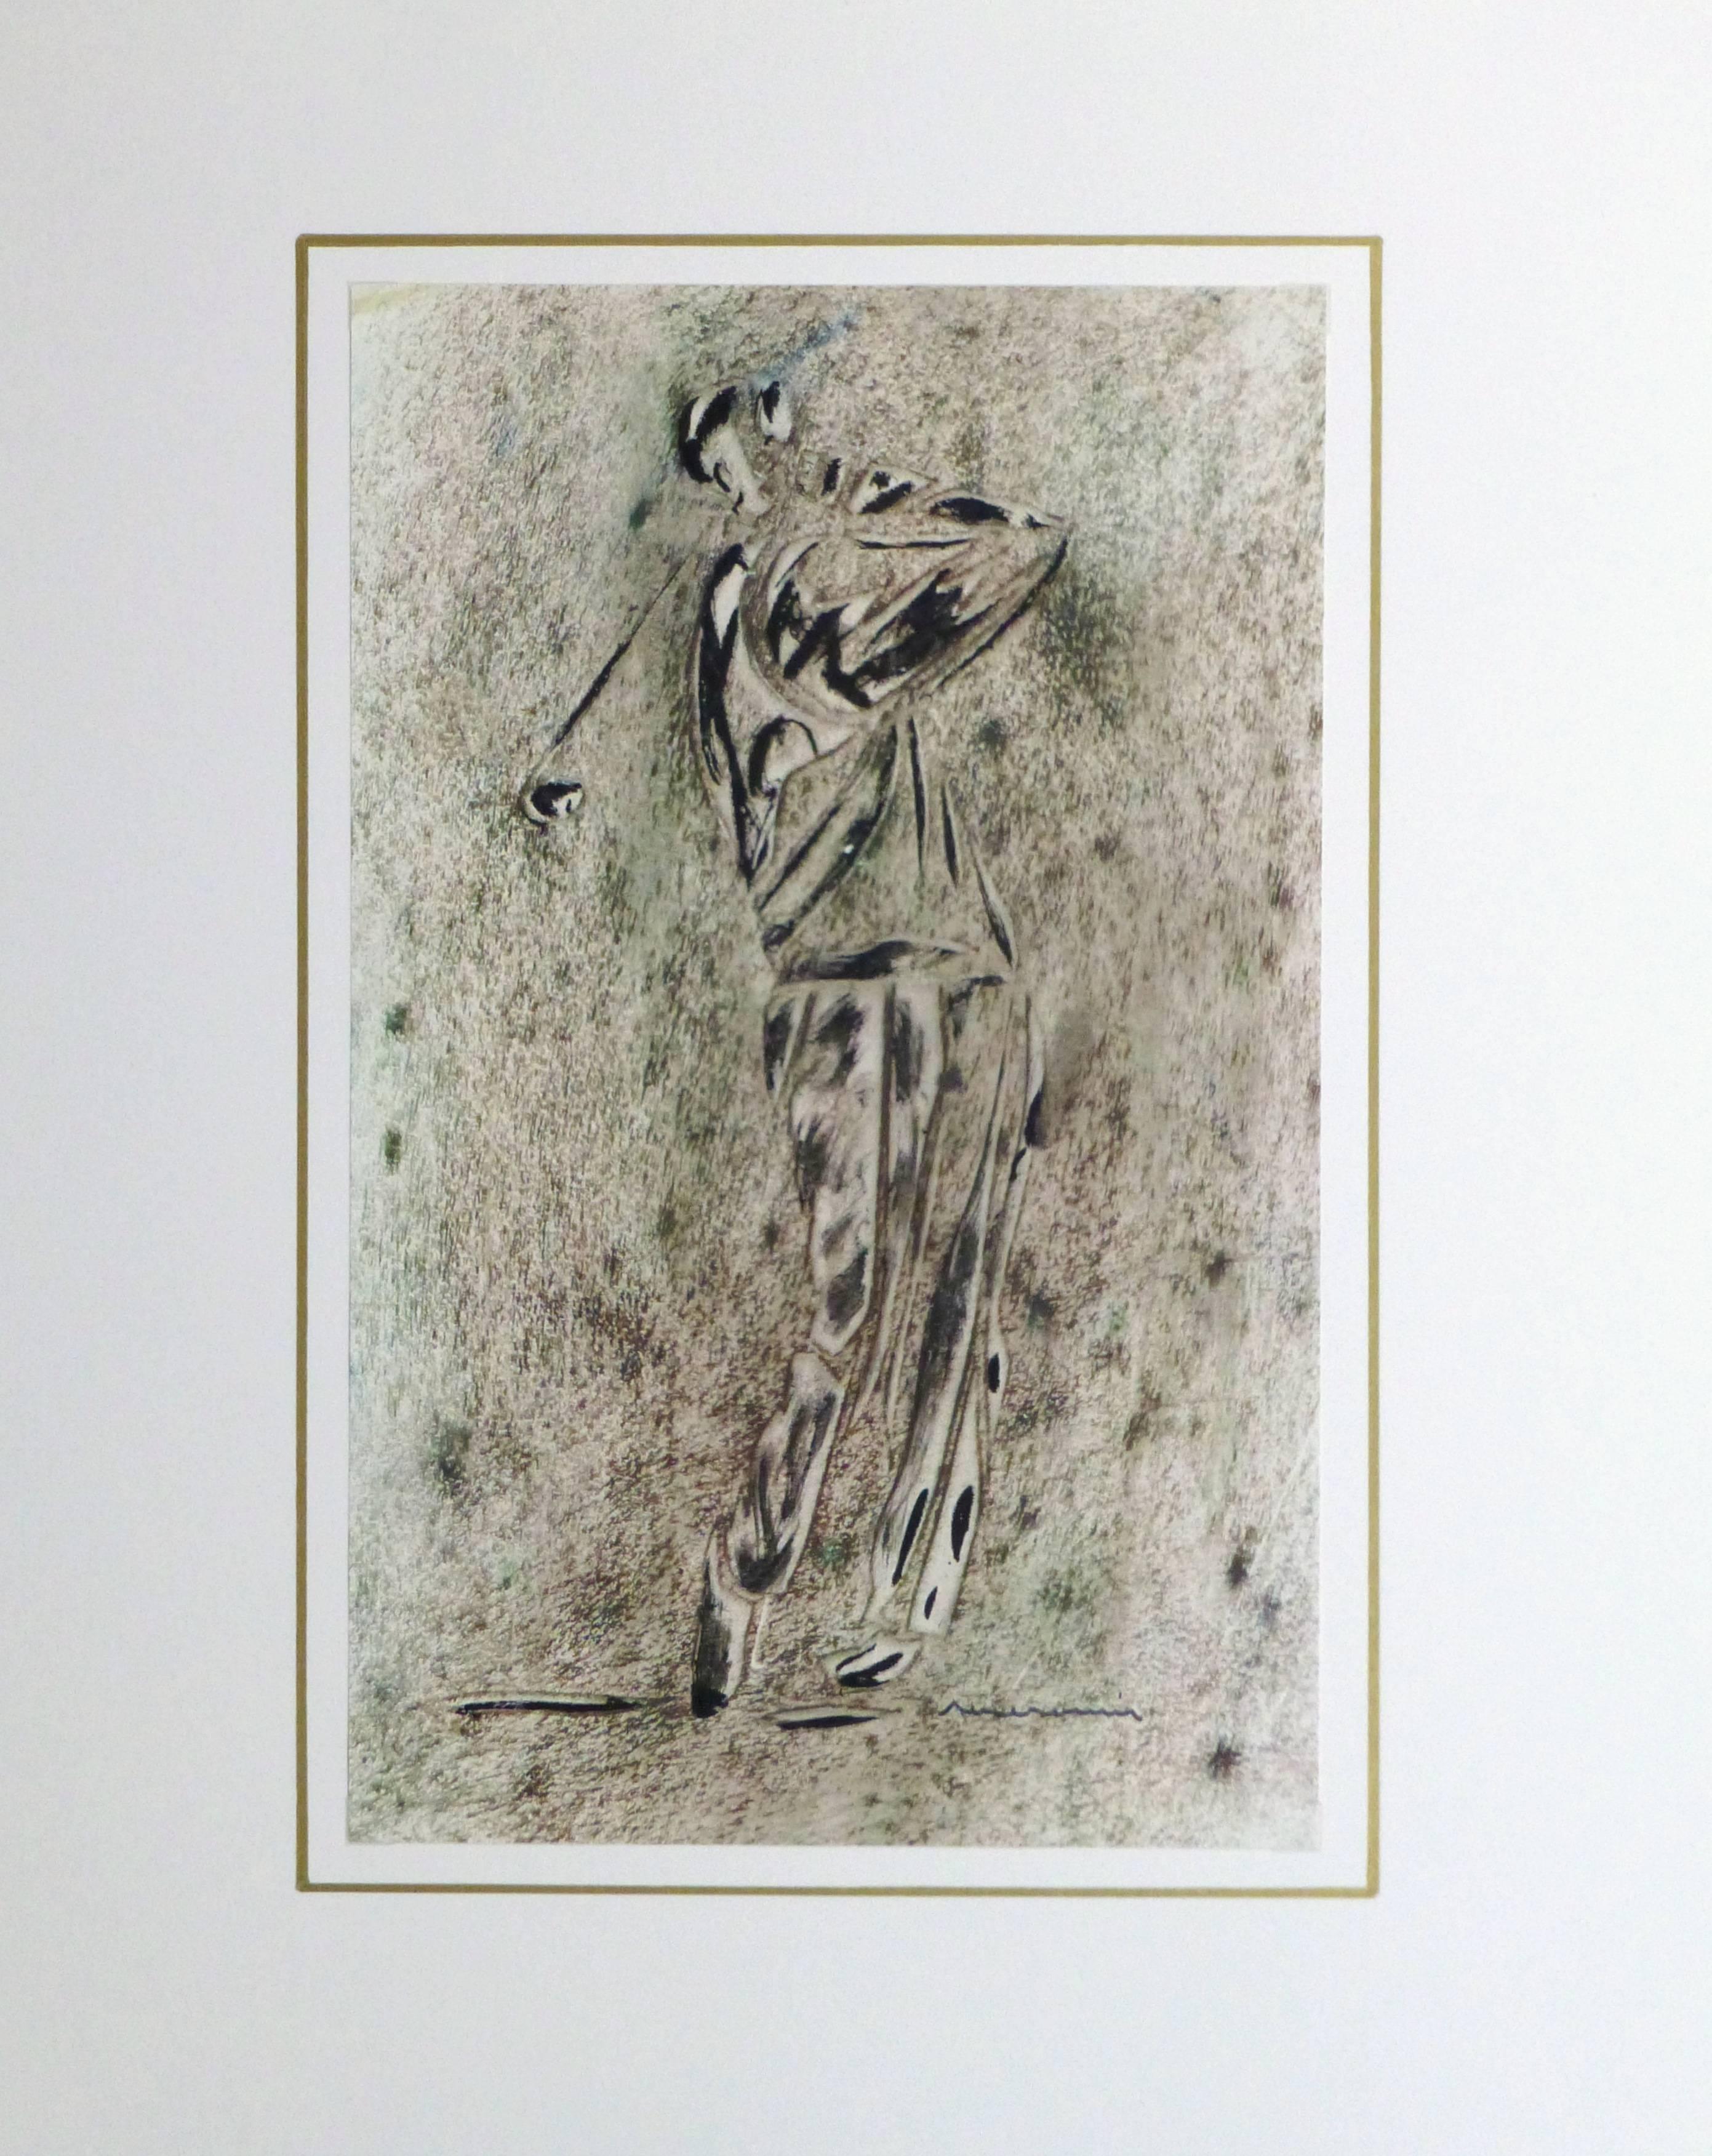 Masculine ink monotype of a male golfer in mid swing, using hues of brown and accented with green, circa 1970. Signed lower right.

Original artwork on paper displayed on a white mat with a gold border. Mat fits a standard-size frame. Archival